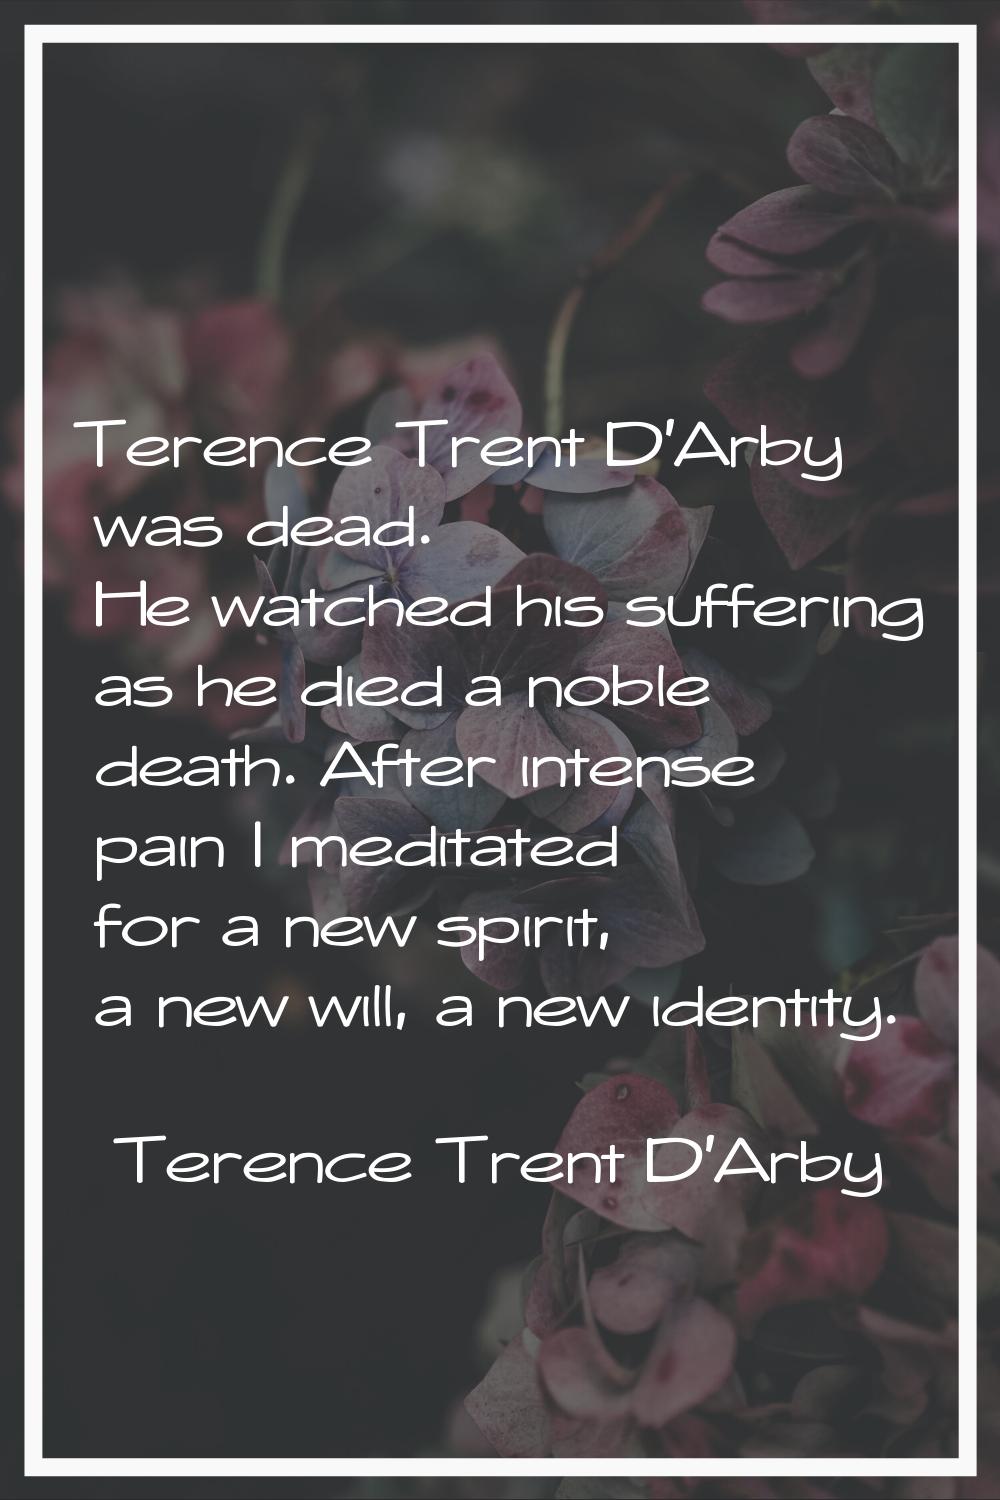 Terence Trent D'Arby was dead. He watched his suffering as he died a noble death. After intense pai